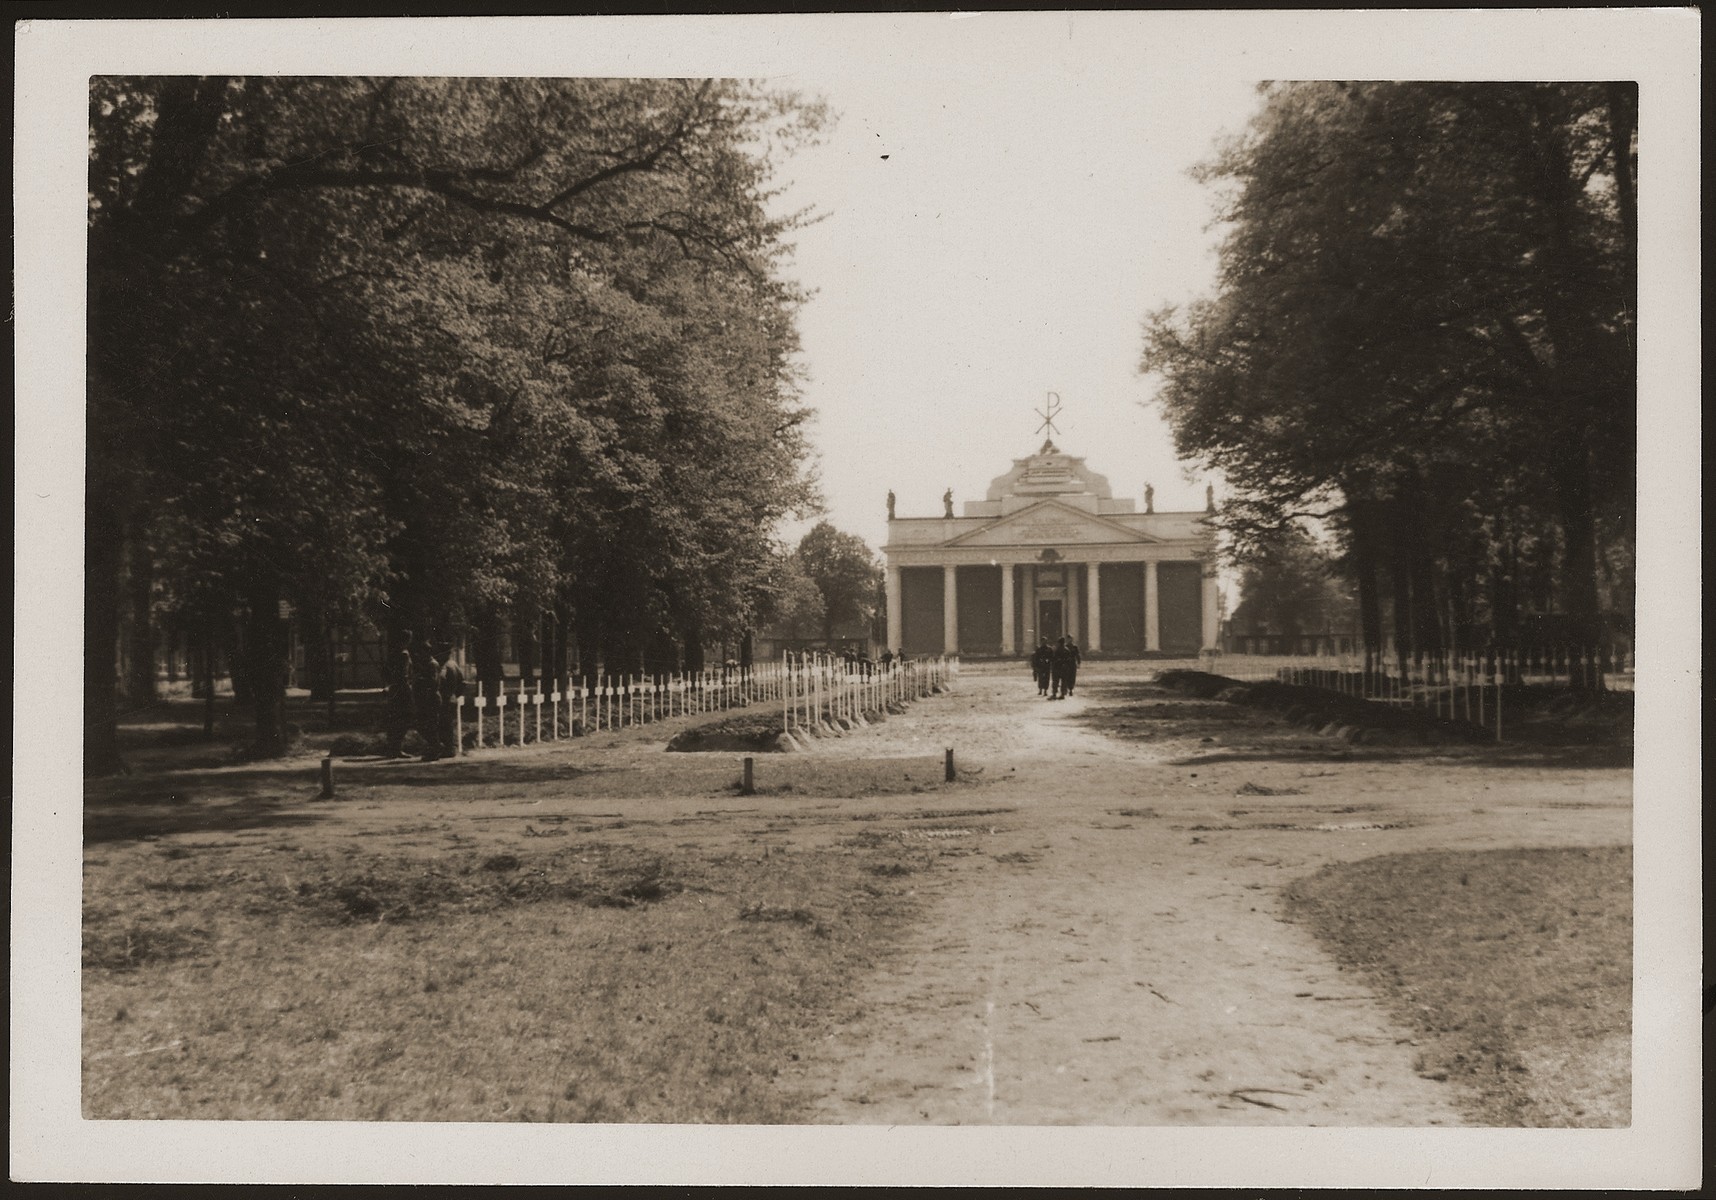 A view of the burial ground in Ludwigslust on the palace grounds of the Archduke of Mecklenburg, where the townspeople were forced by U.S. troops to bury the corpses of prisoners killed in the Woebbelin concentration camp .